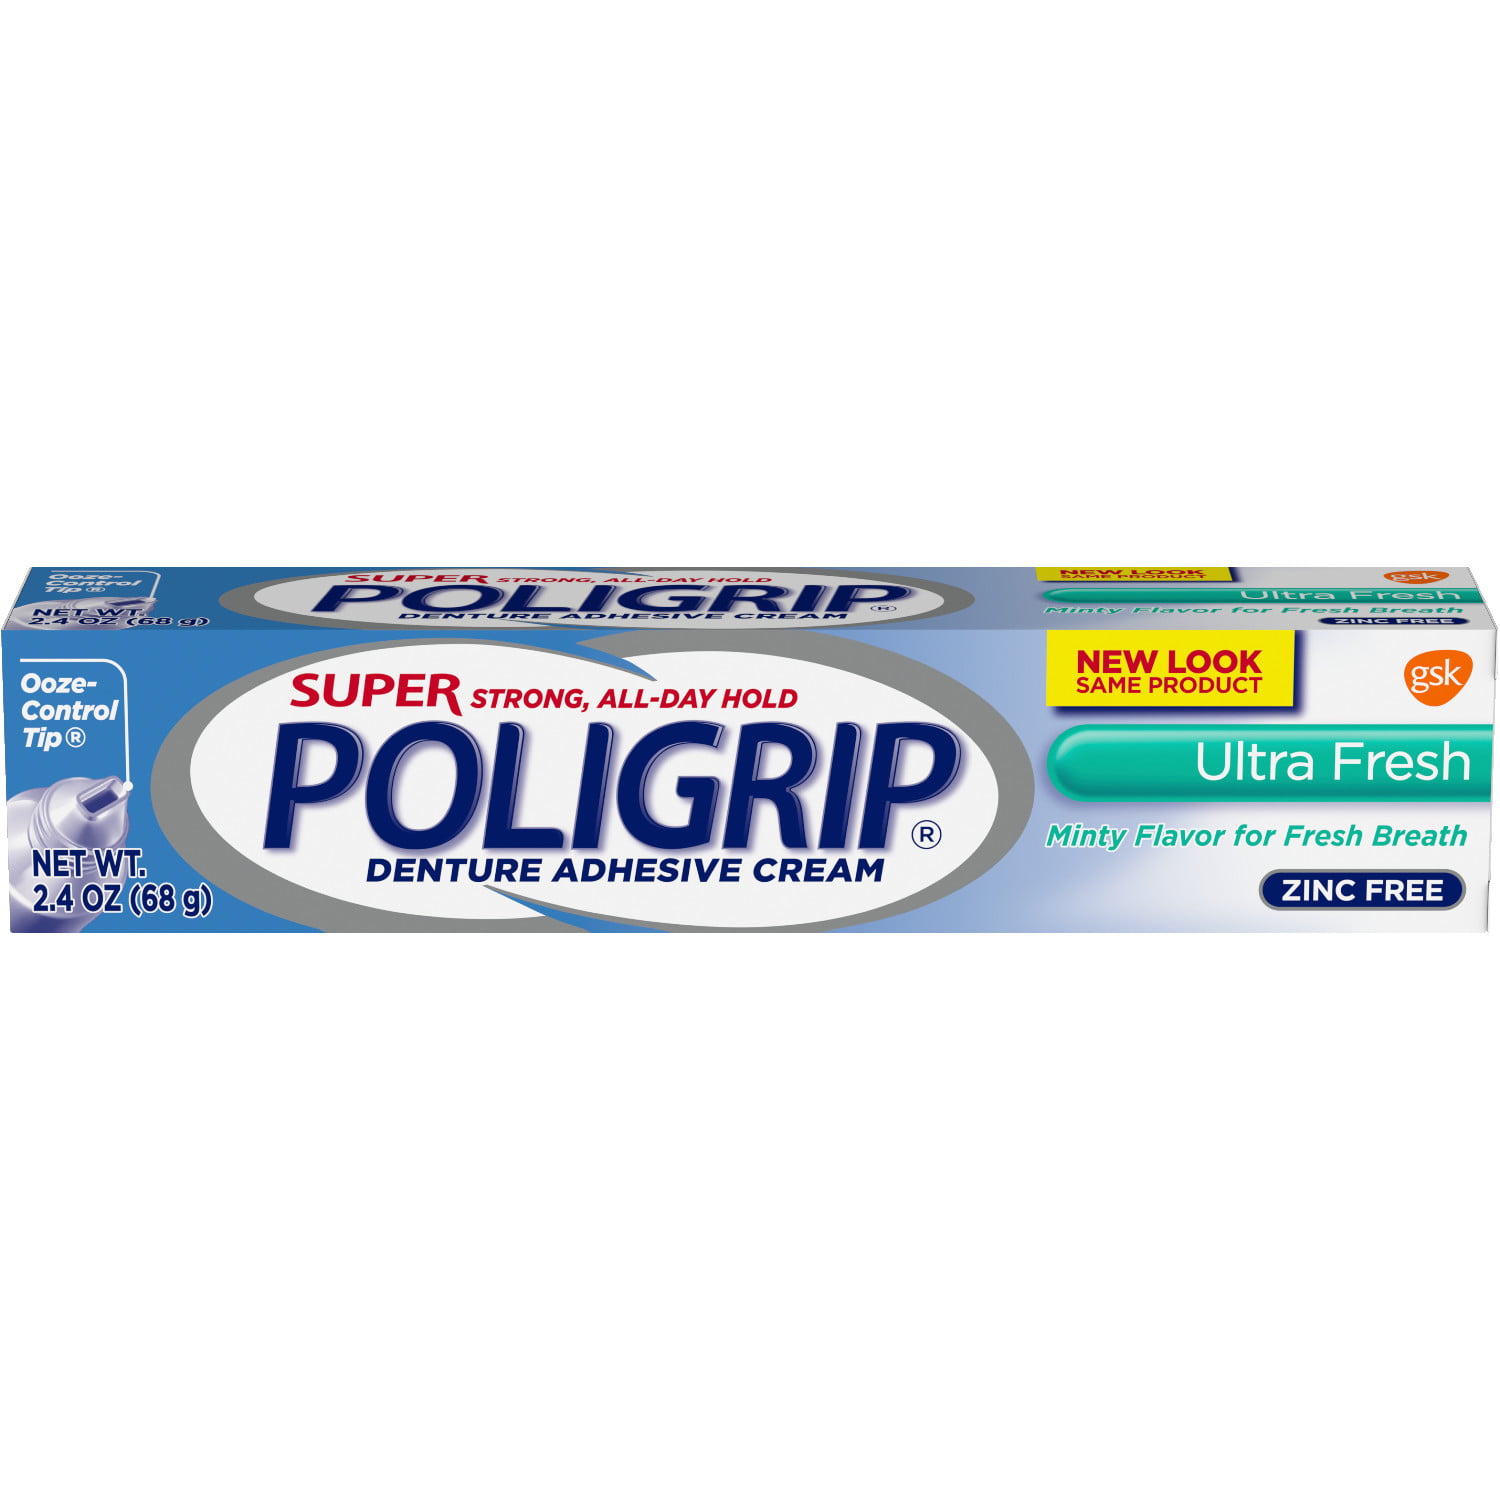 Photo 1 of 2 PACK Super Poligrip Ultra Fresh Mint Flavor Zinc Free Denture and Partials Adhesive Cream, 2.4 Ounce